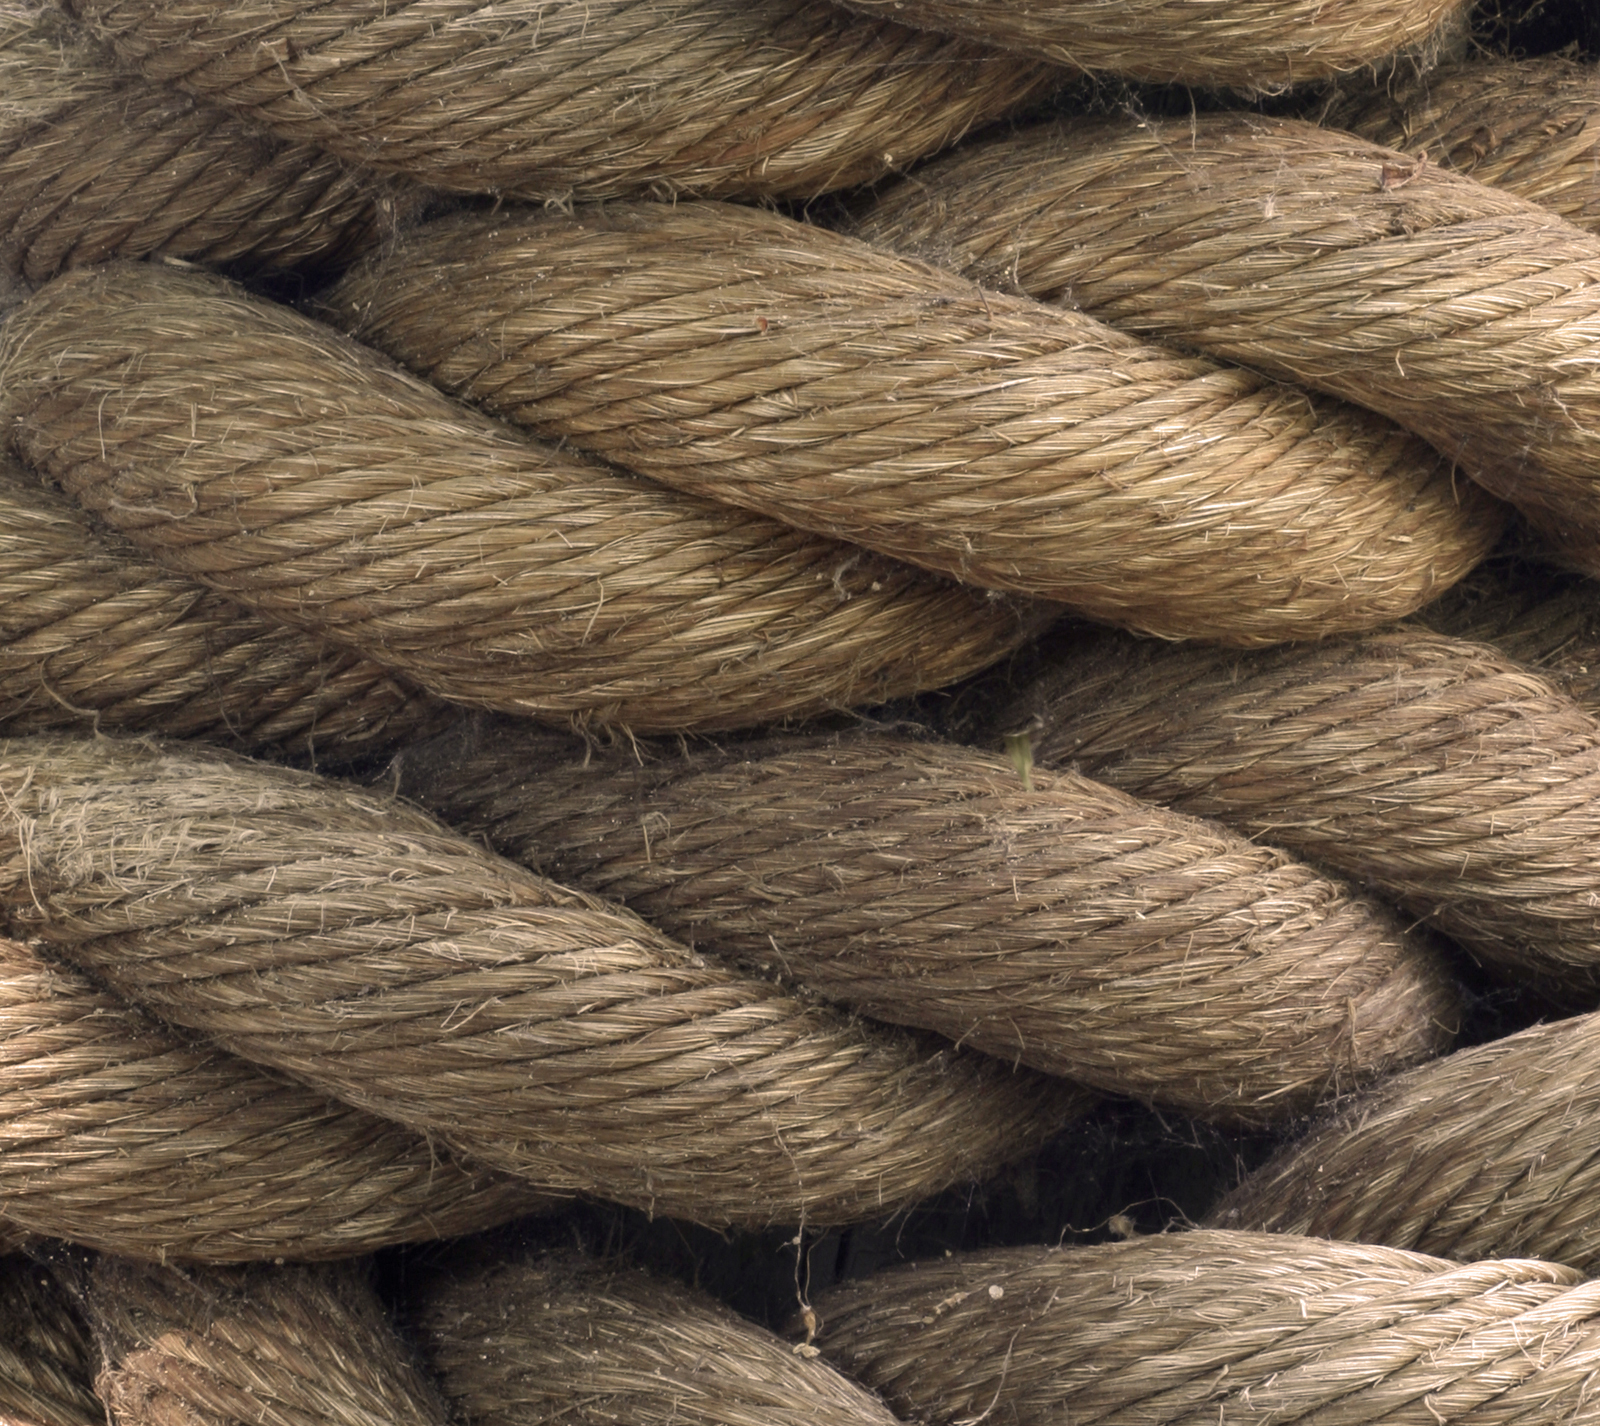 rope, texture, download photo, background, rope texture background